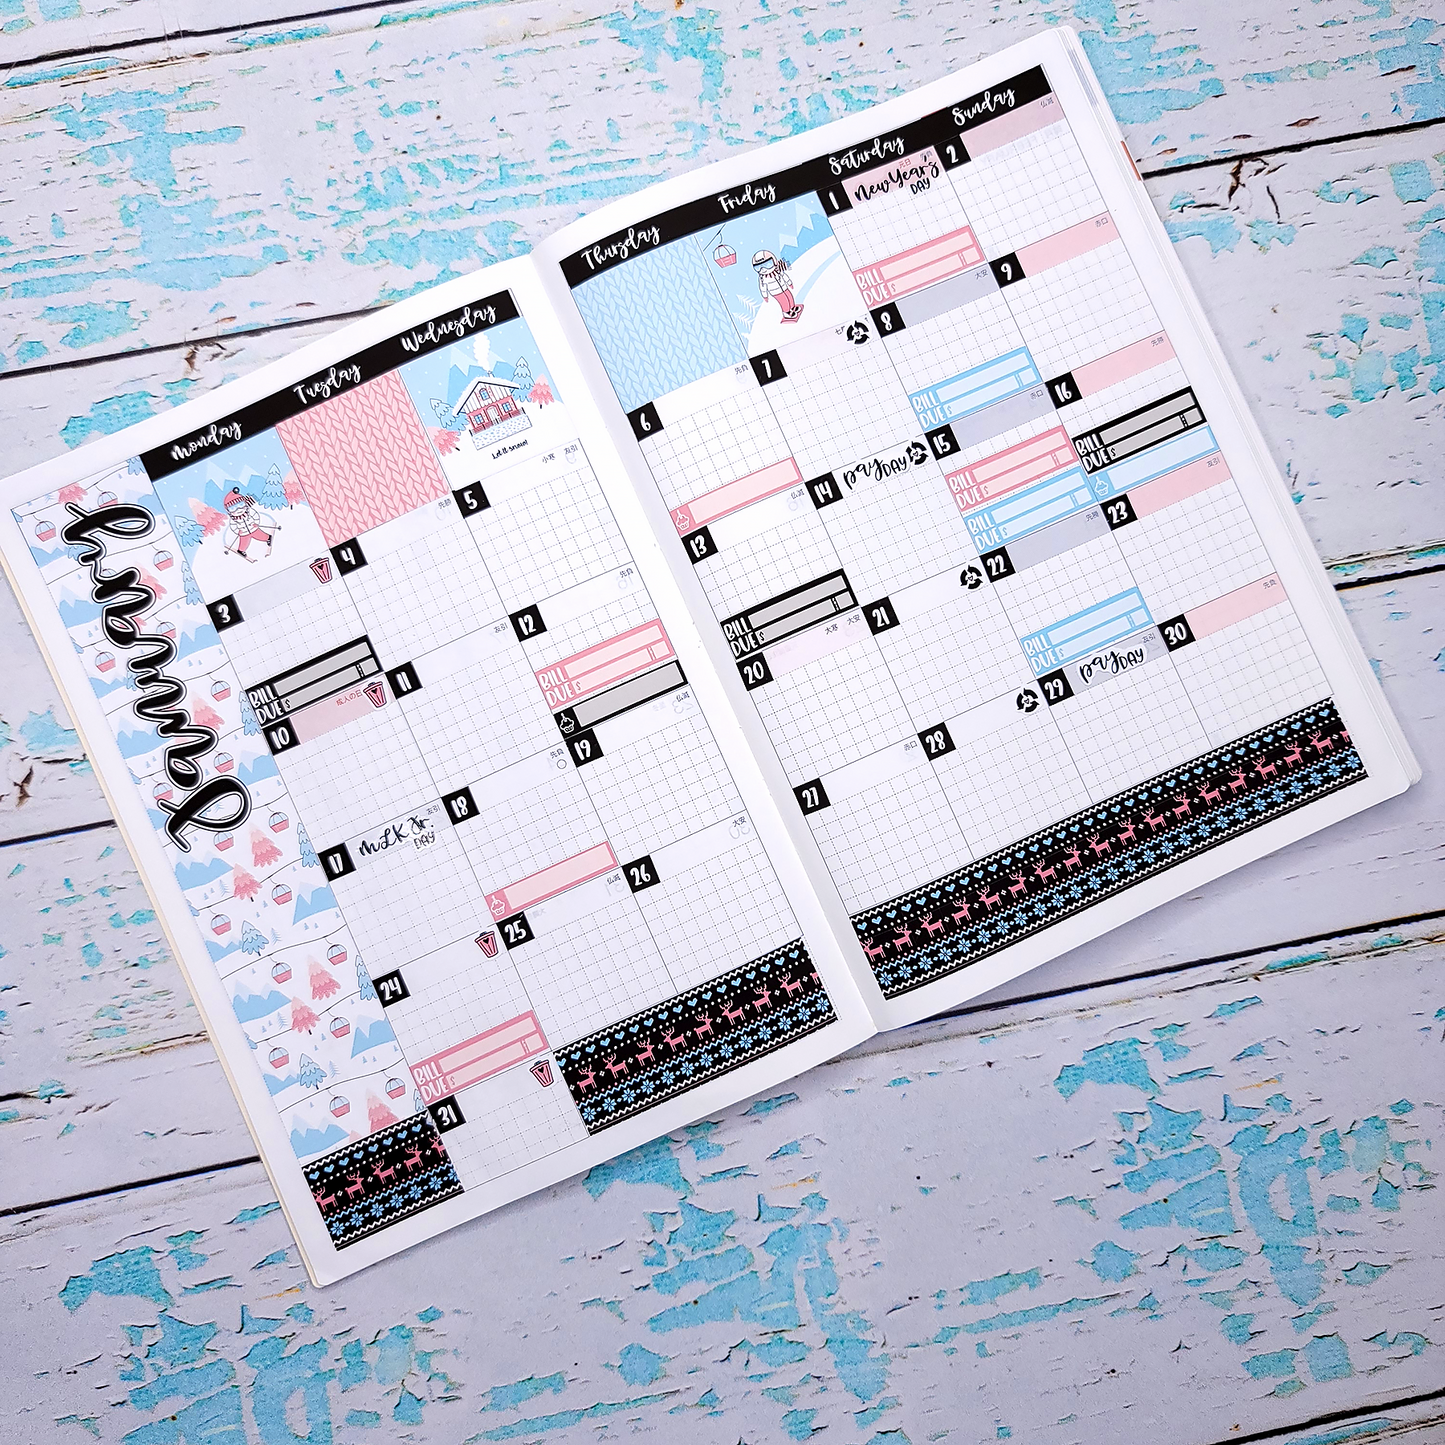 Hobonichi Cousin Monthly Pick Your Month Zest for Life Themed Planner Sticker Kit for Hobo Cousin or Similar Planners